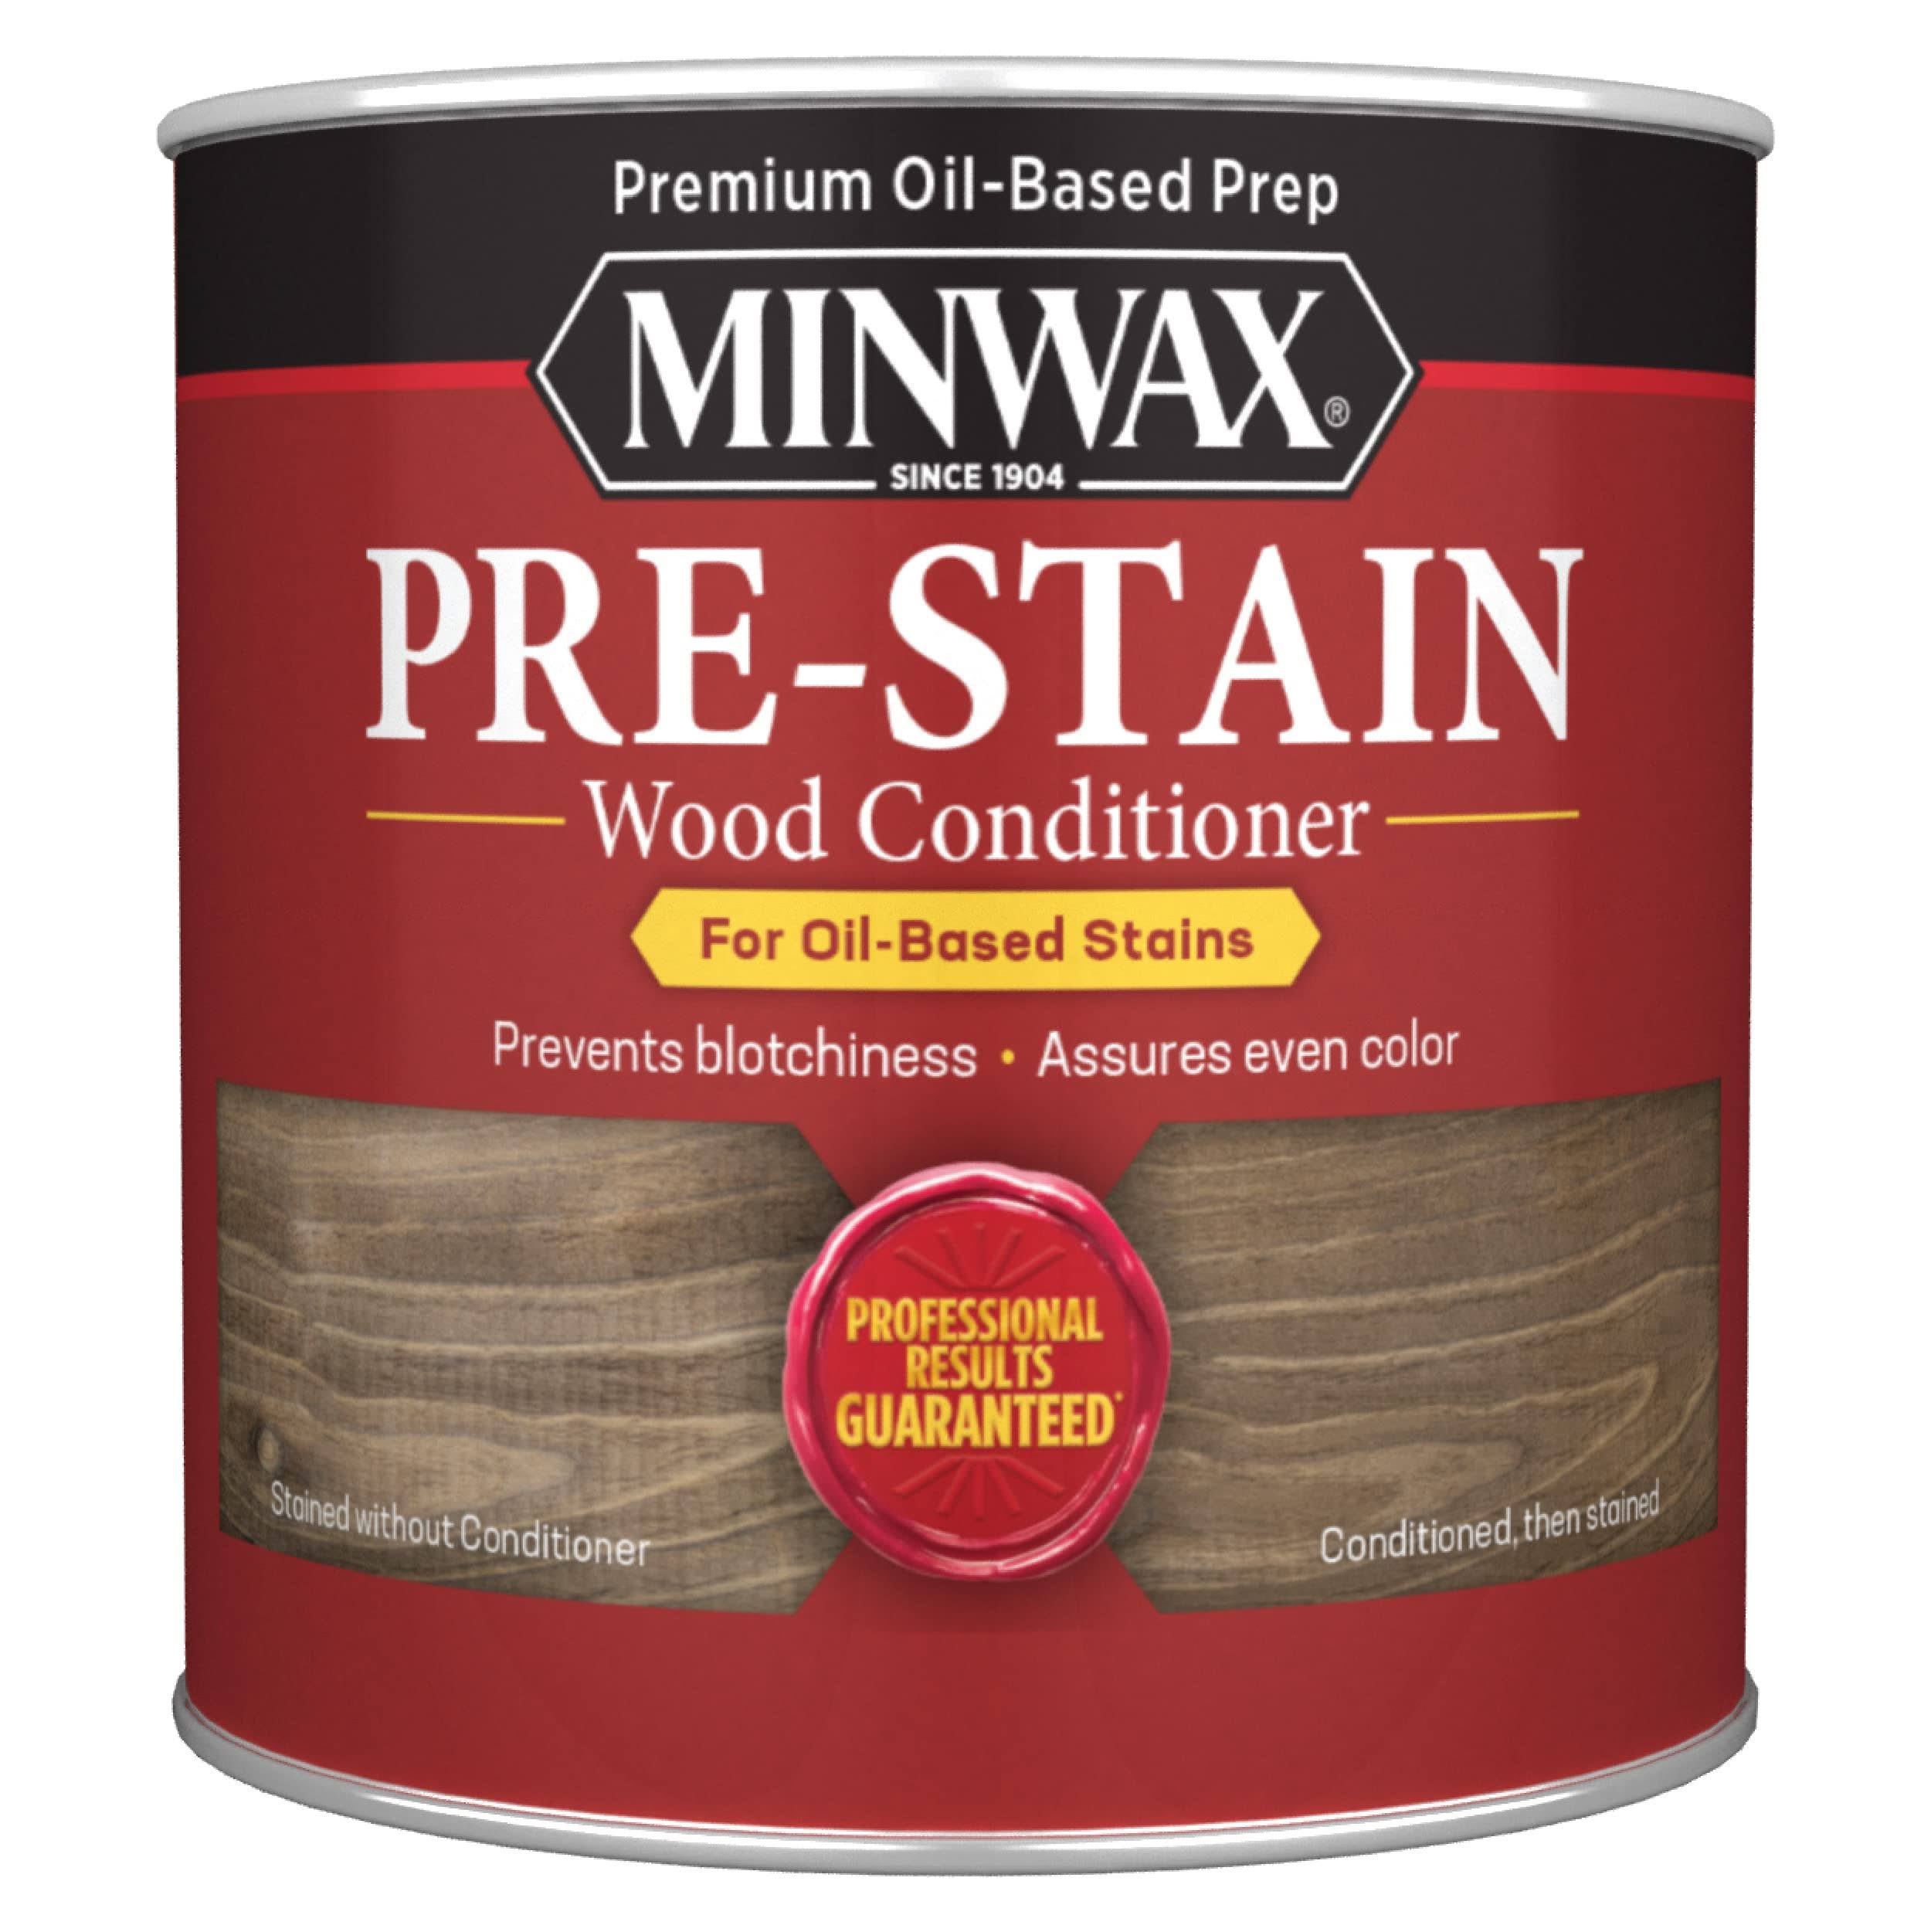 Minwax 13407 Pre-Stain Wood Conditioner - 1/2 Pint